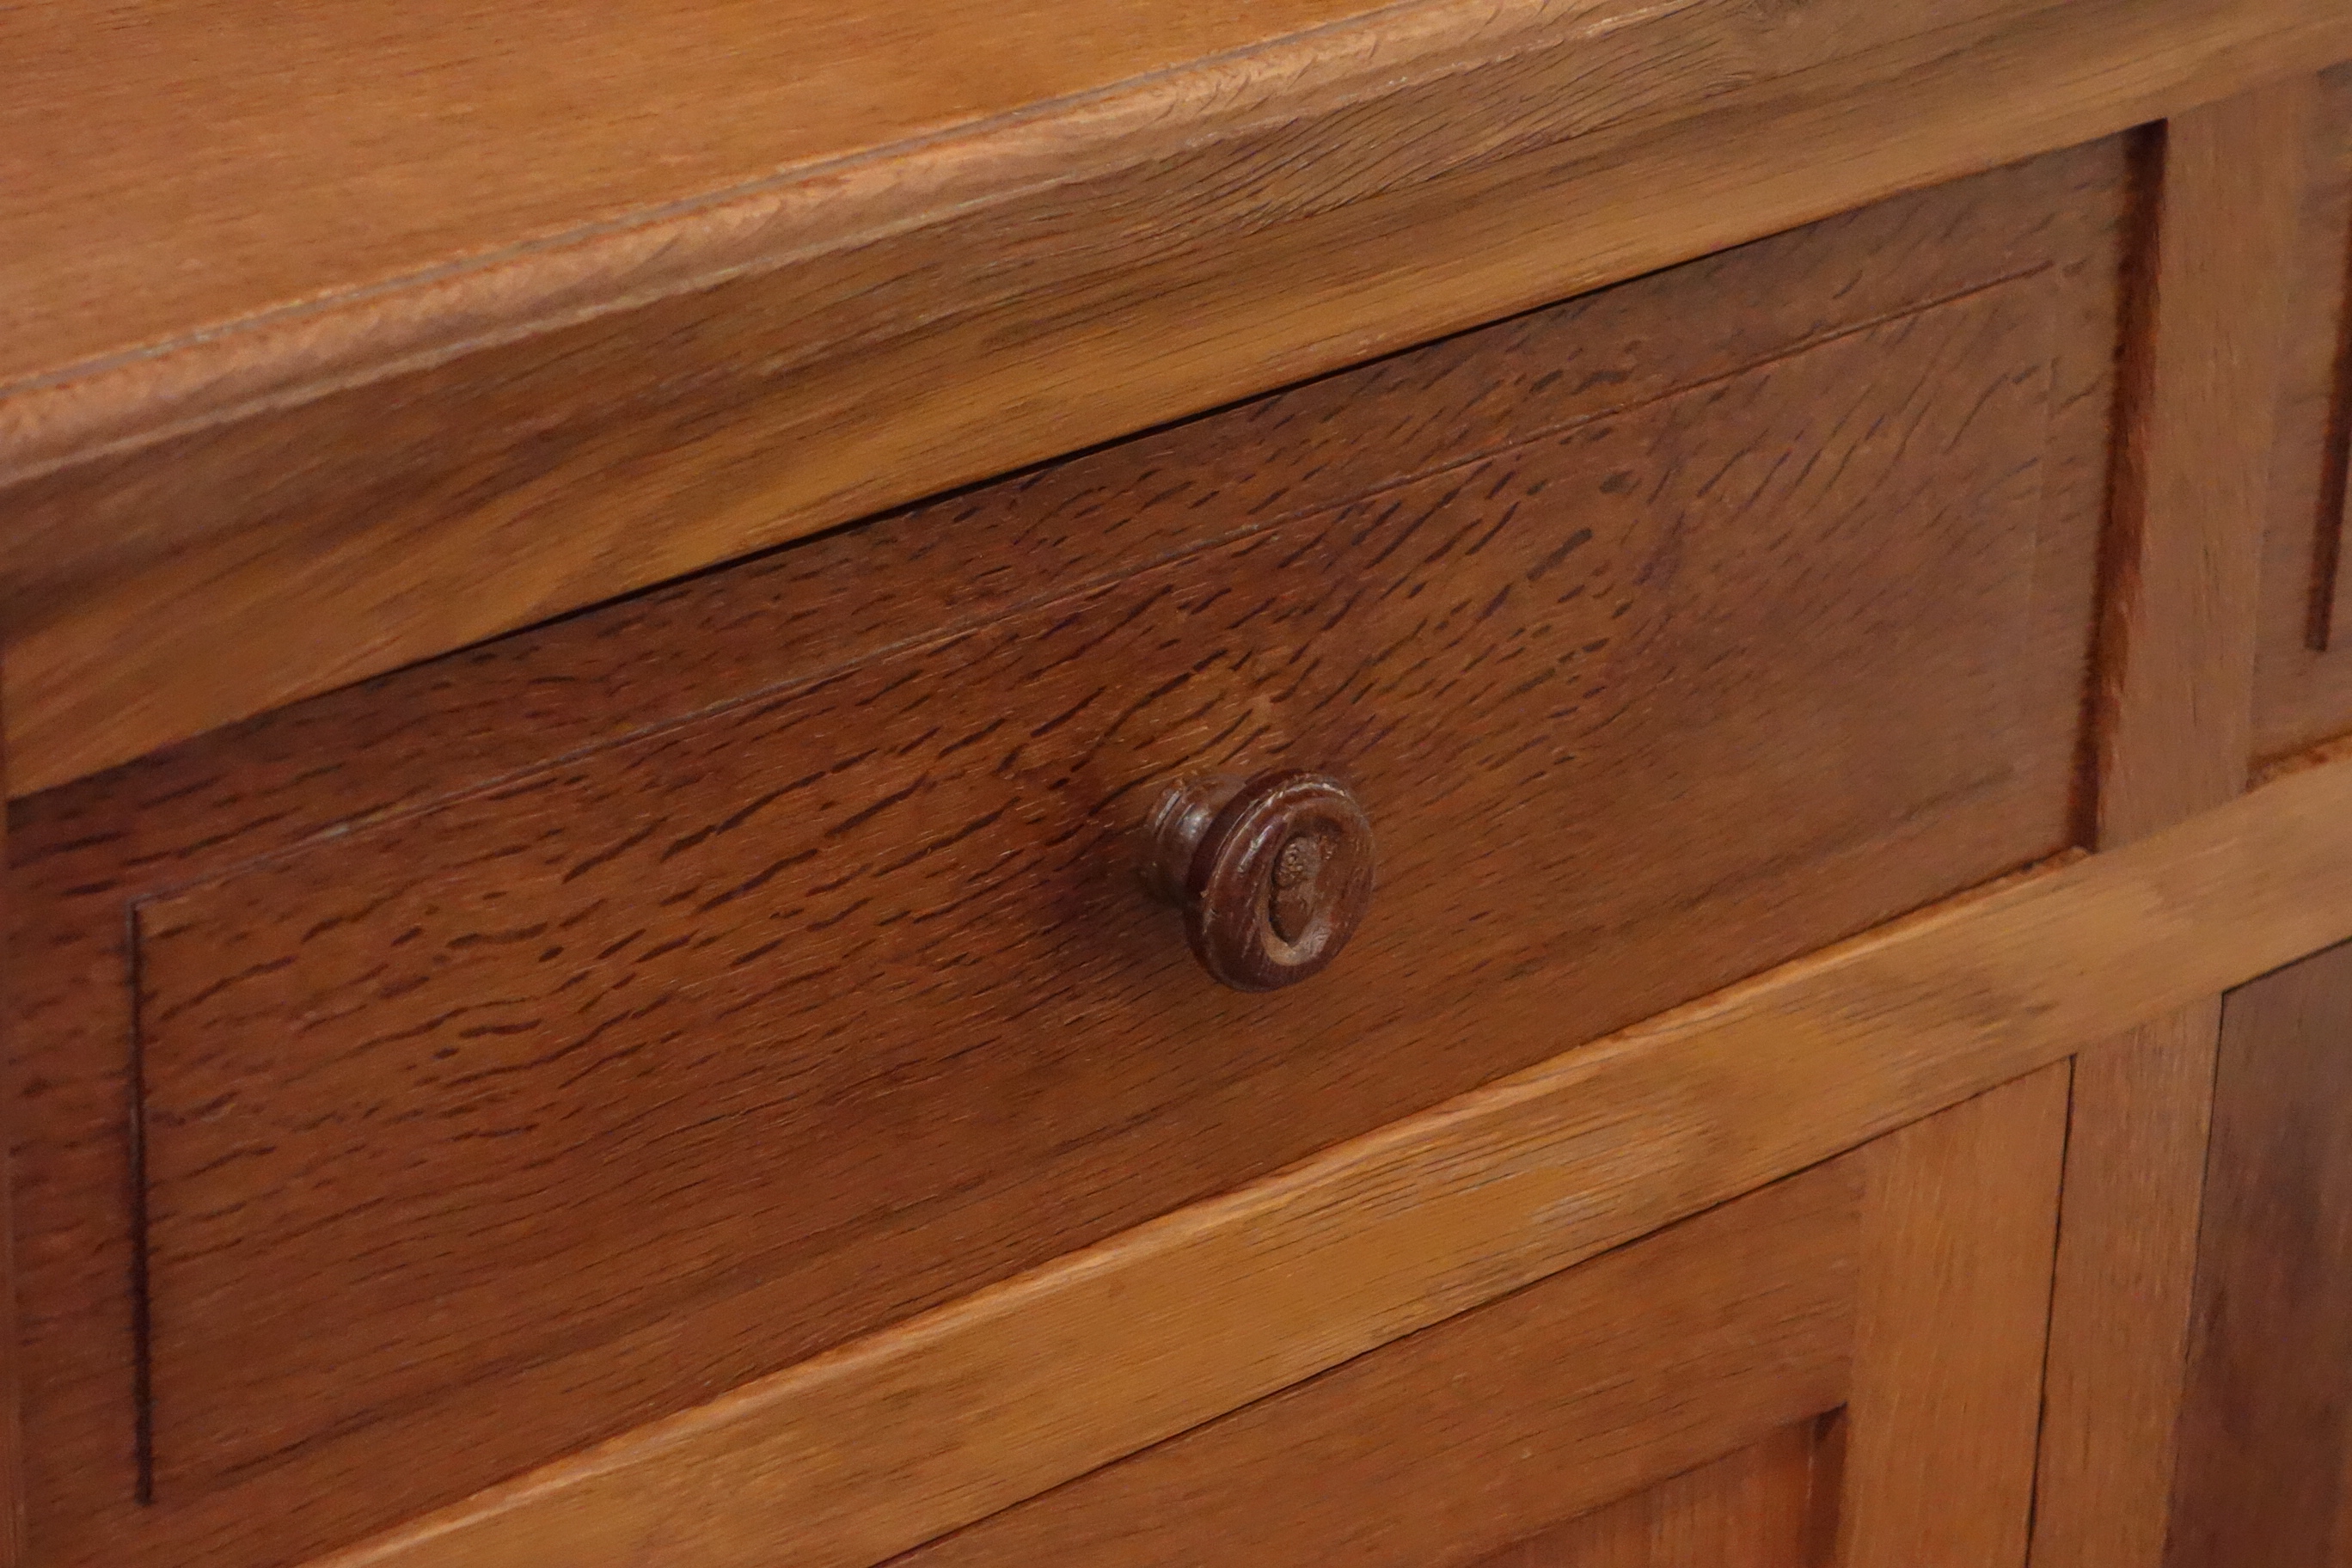 Yorkshire oak - 'Acornman' dresser fitted with two drawers, - Image 2 of 4